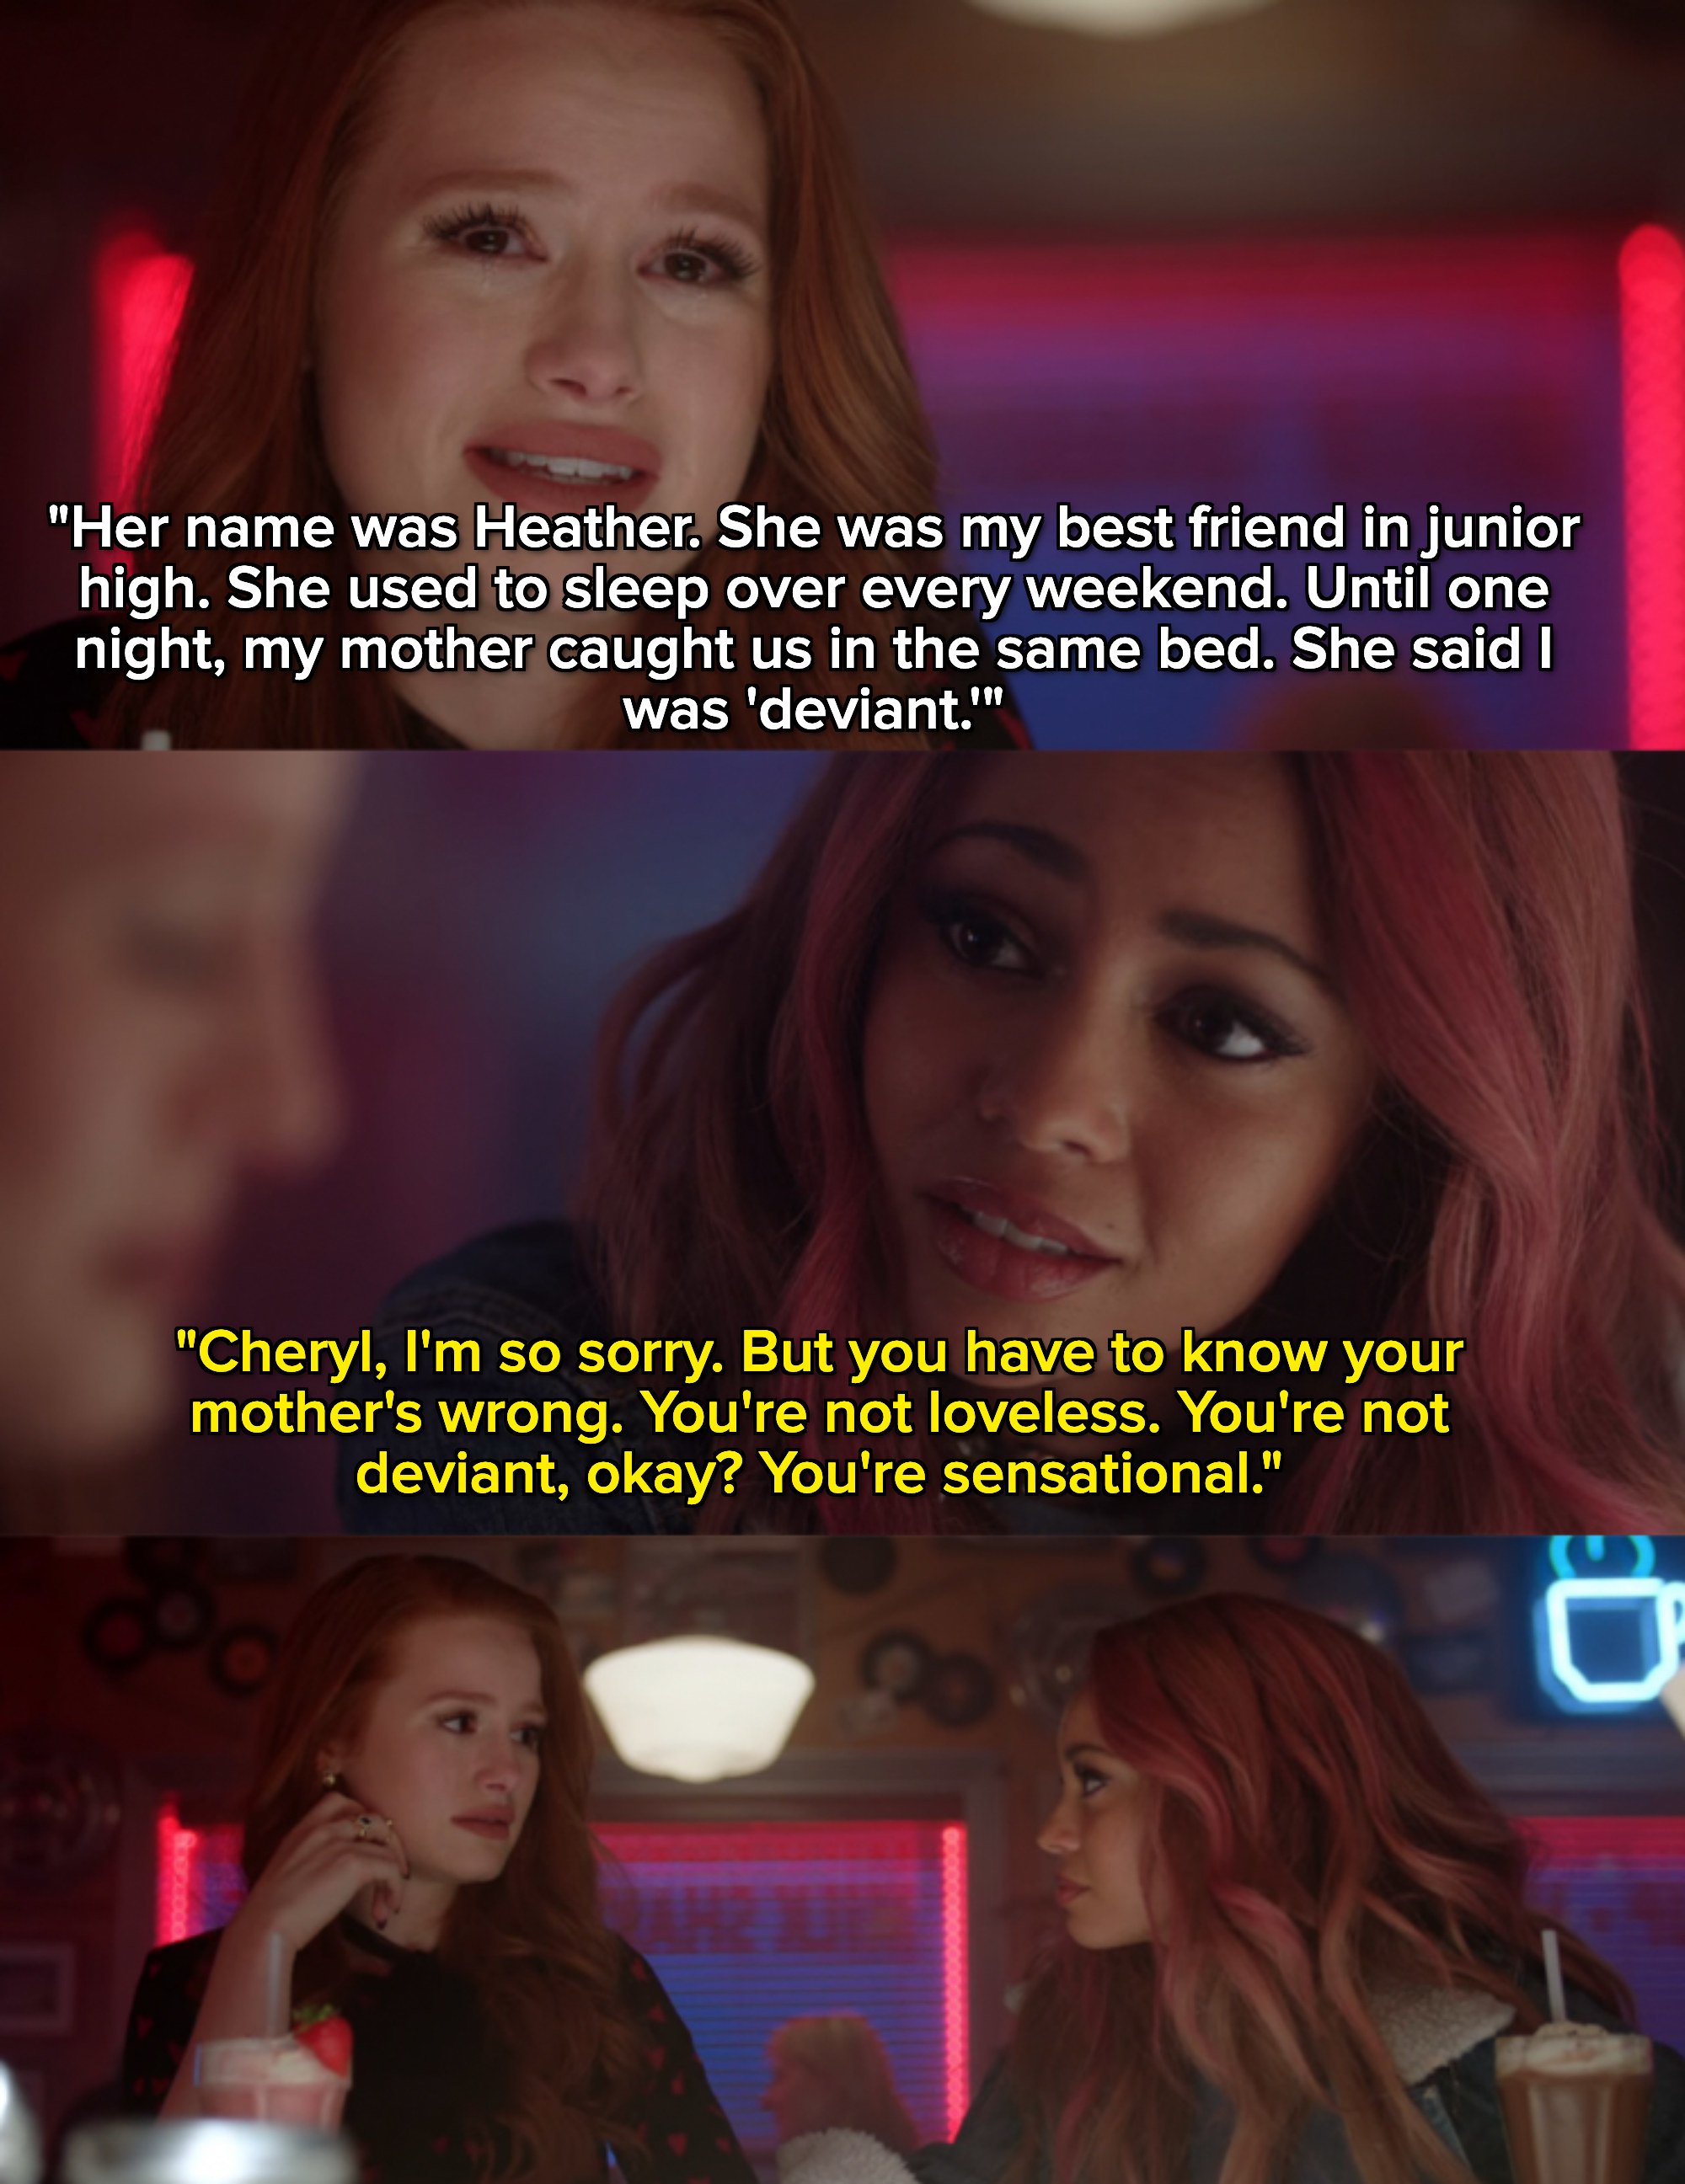 Cheryl Blossom cries before Toni Topaz comforts her and they begin to hold hands while drinking milkshakes in a diner